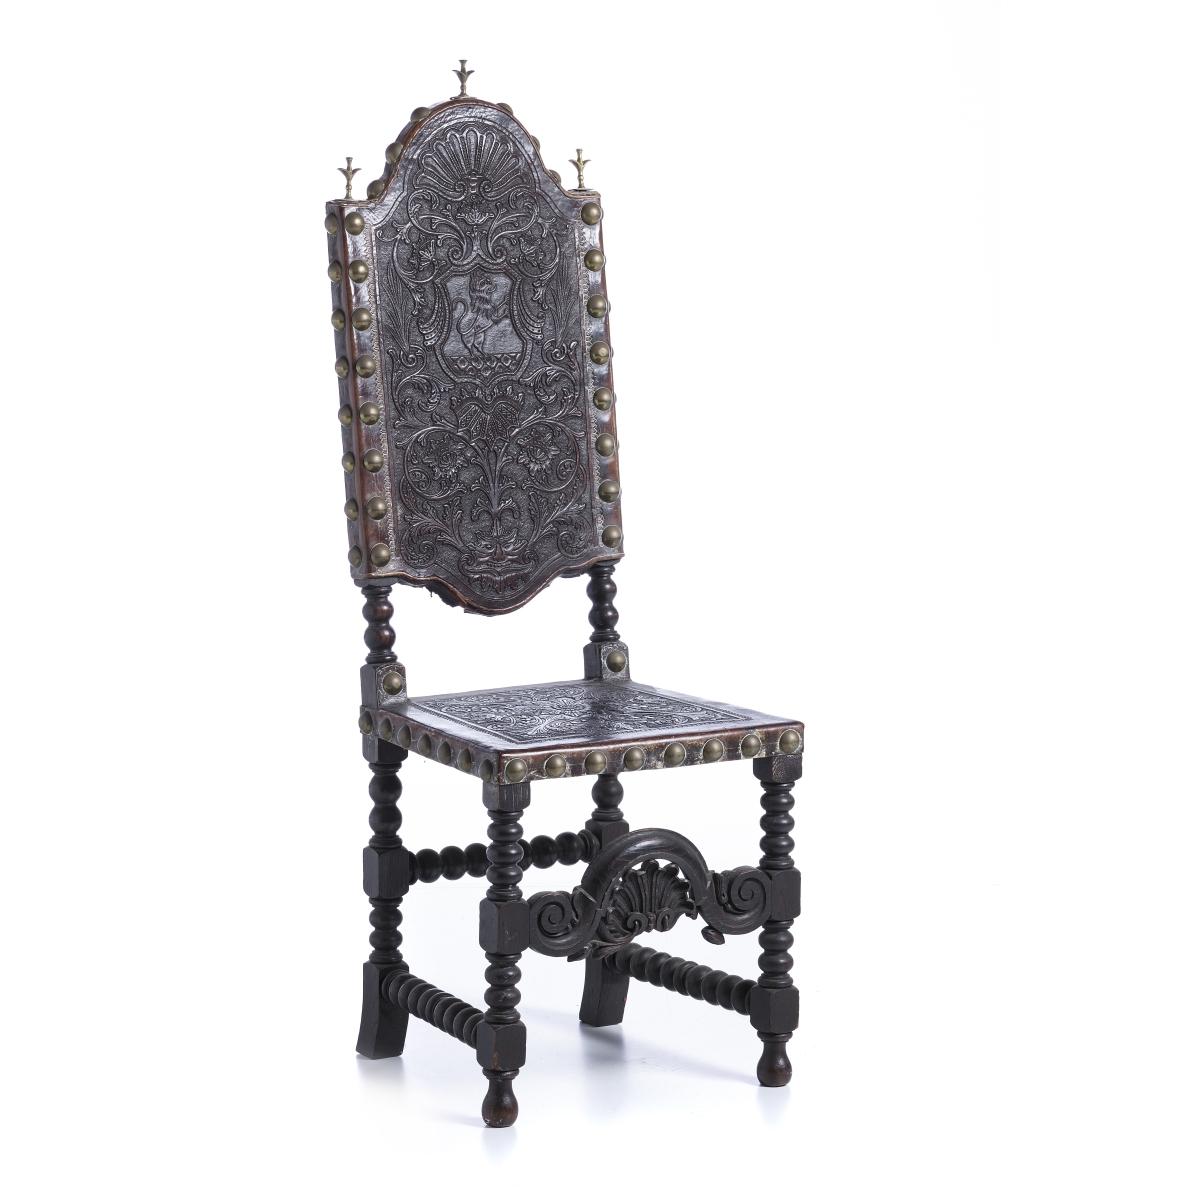 High back chair
19th Century Portuguese
in chestnut wood, with leather and studs.
Engraved leathers with plant motifs and rampant lion. Minor glitches.
Dim.: 129 x 45 x 42 cm.